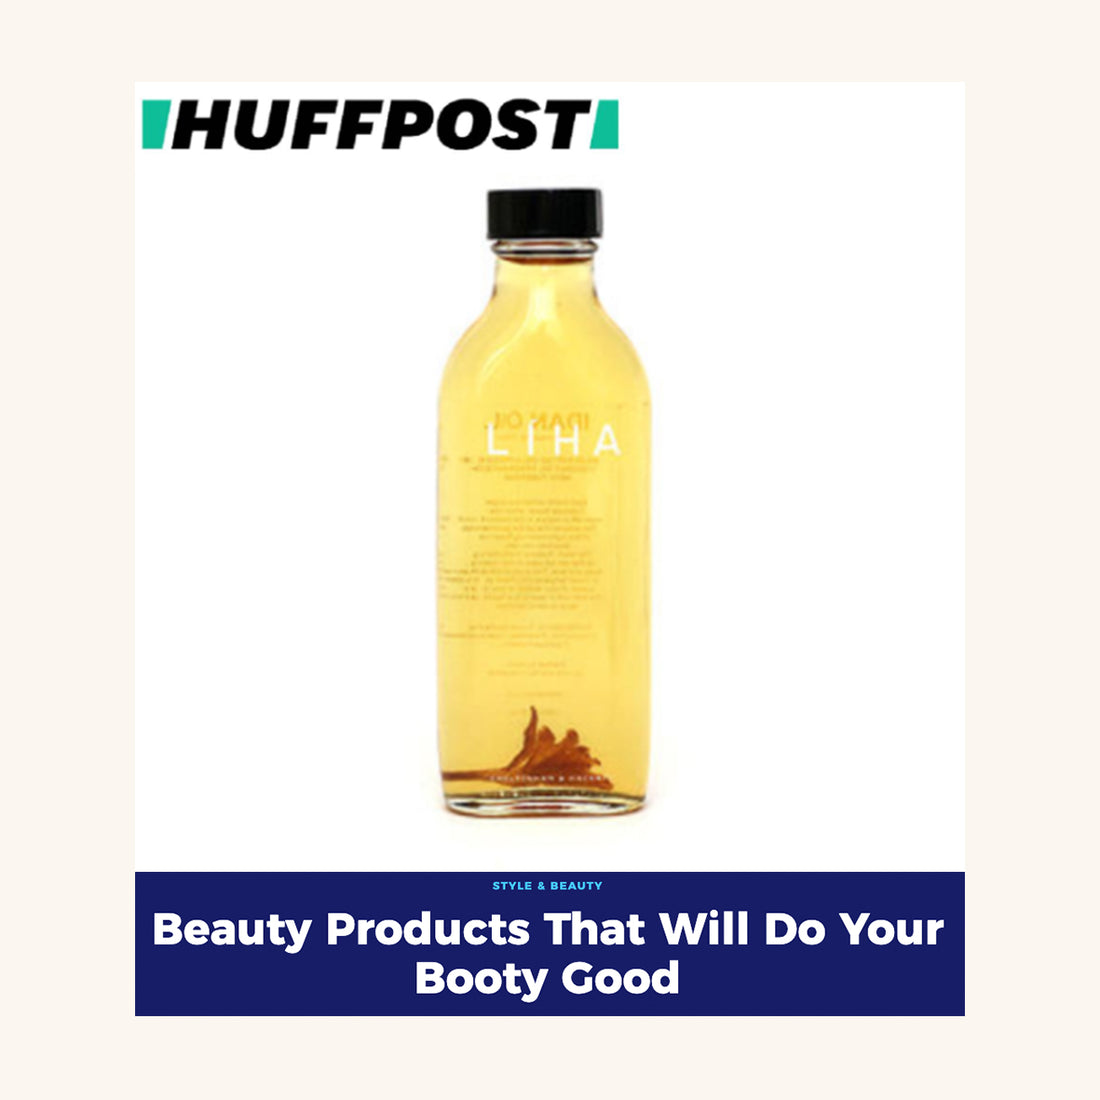 HUFFPOST: Beauty Products That Will Do Your Booty Good